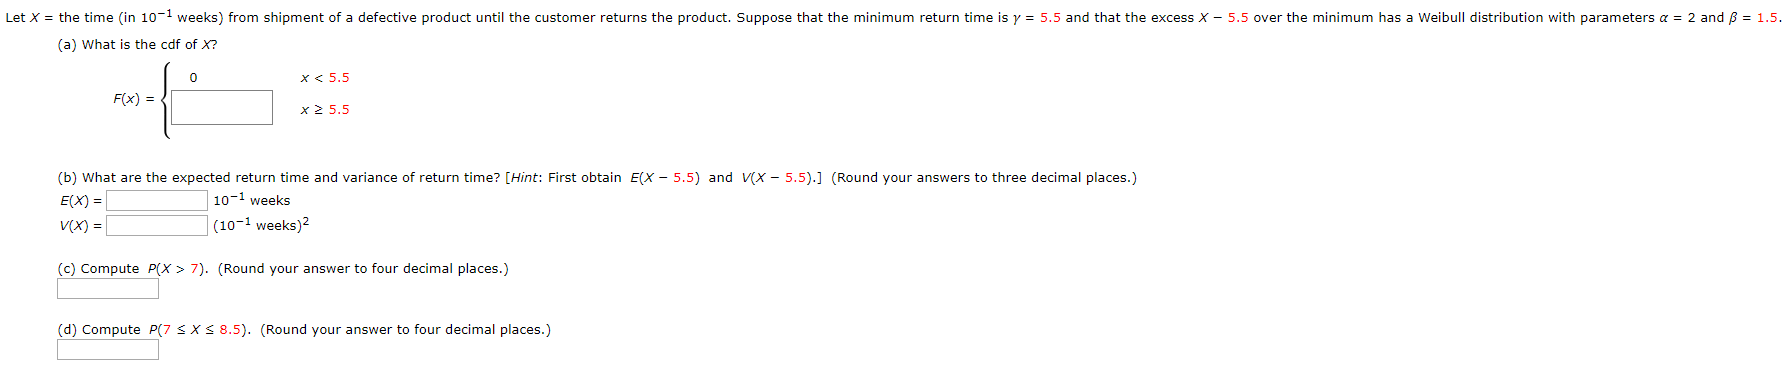 Let X = the time (in 10-1 weeks) from shipment of a defective product until the customer returns the product. Suppose that the minimum return time is y = 5.5 and that the excess X - 5.5 over the minimum has a Weibull distribution with parameters a = 2 and B = 1.5.
(a) What is the cdf of X?
x< 5.5
F(x) = {
x2 5.5
(b) What are the expected return time and variance of return time? [Hint: First obtain E(X - 5.5) and V(X - 5.5).] (Round your answers to three decimal places.)
E(X) =
V(X) =|
10-1 weeks
(10-1 weeks)?
(c) Compute P(X > 7). (Round your answer to four decimal places.)
(d) Compute P(7 SXS 8.5). (Round your answer to four decimal places.)
